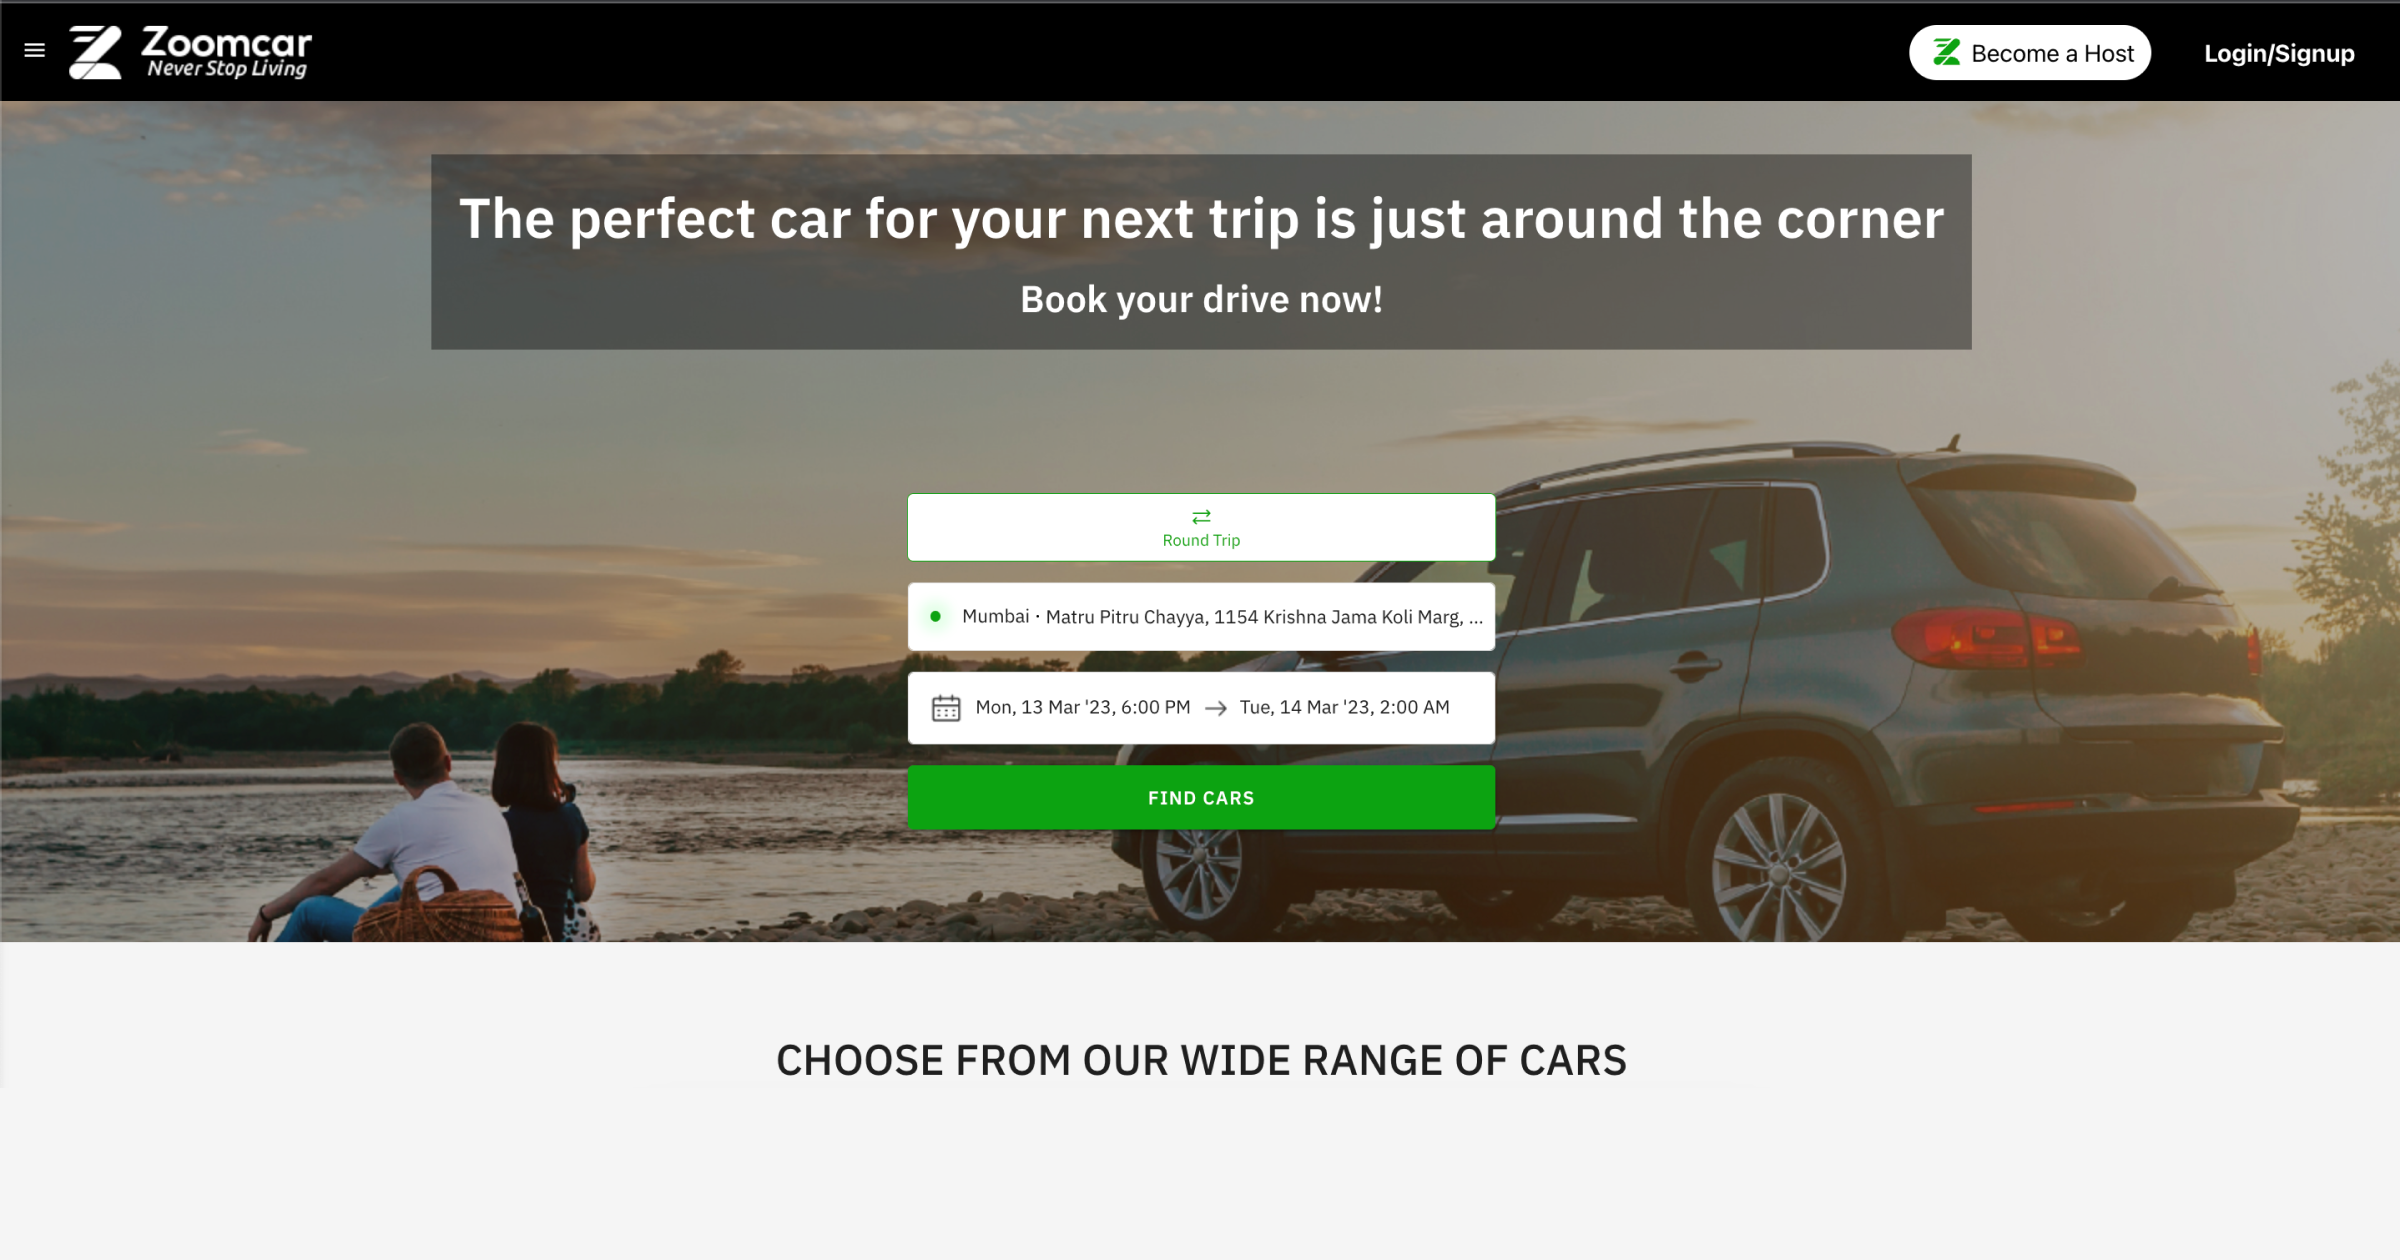 How Zoomcar leveraged CRM